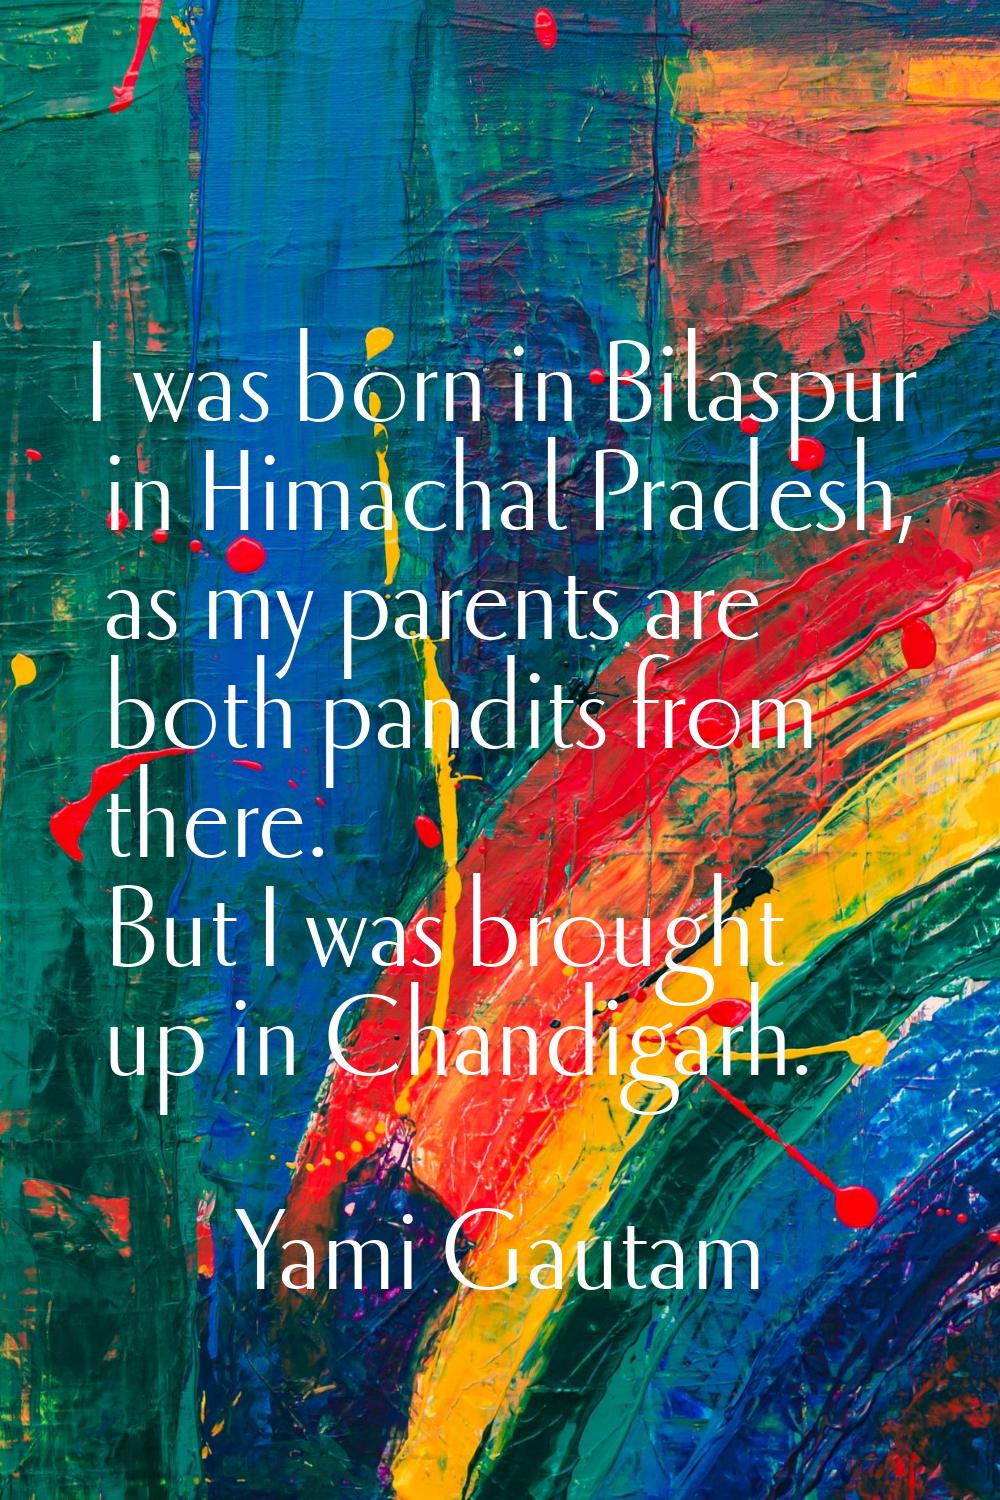 I was born in Bilaspur in Himachal Pradesh, as my parents are both pandits from there. But I was br